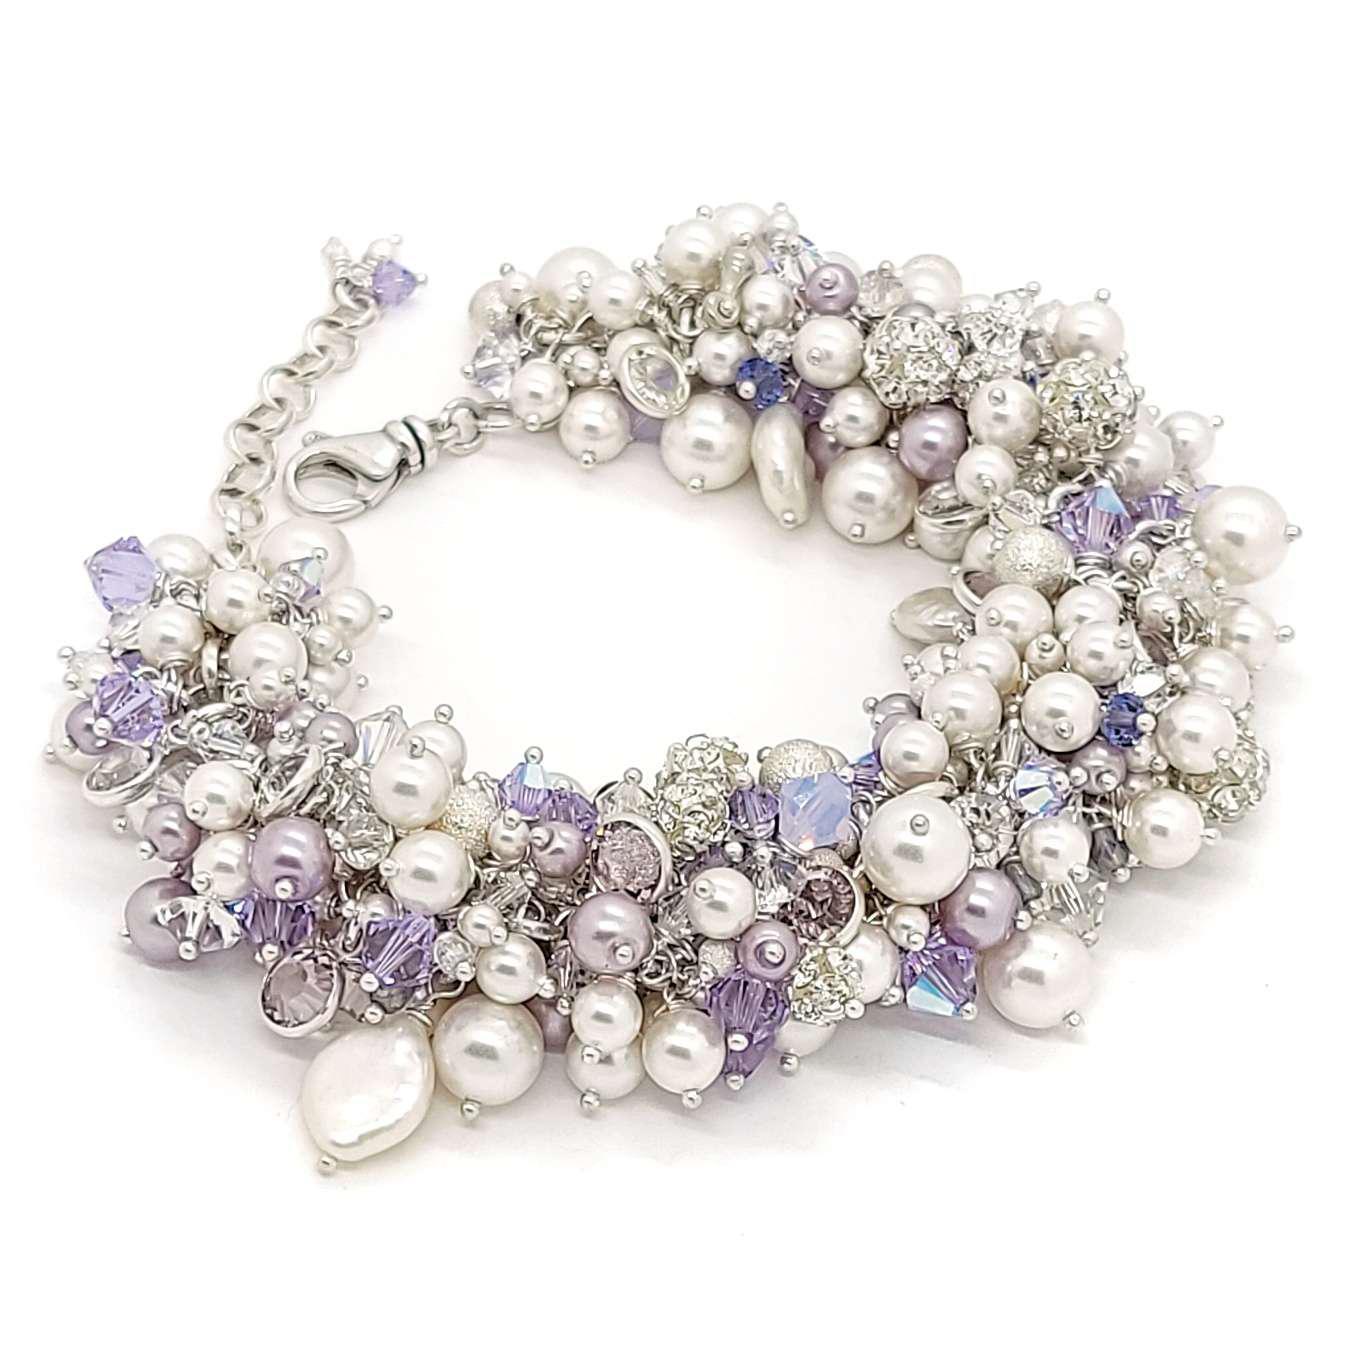 Bracelet - Amethyst and White Pearls and Crystals by Sugar Sidewalk